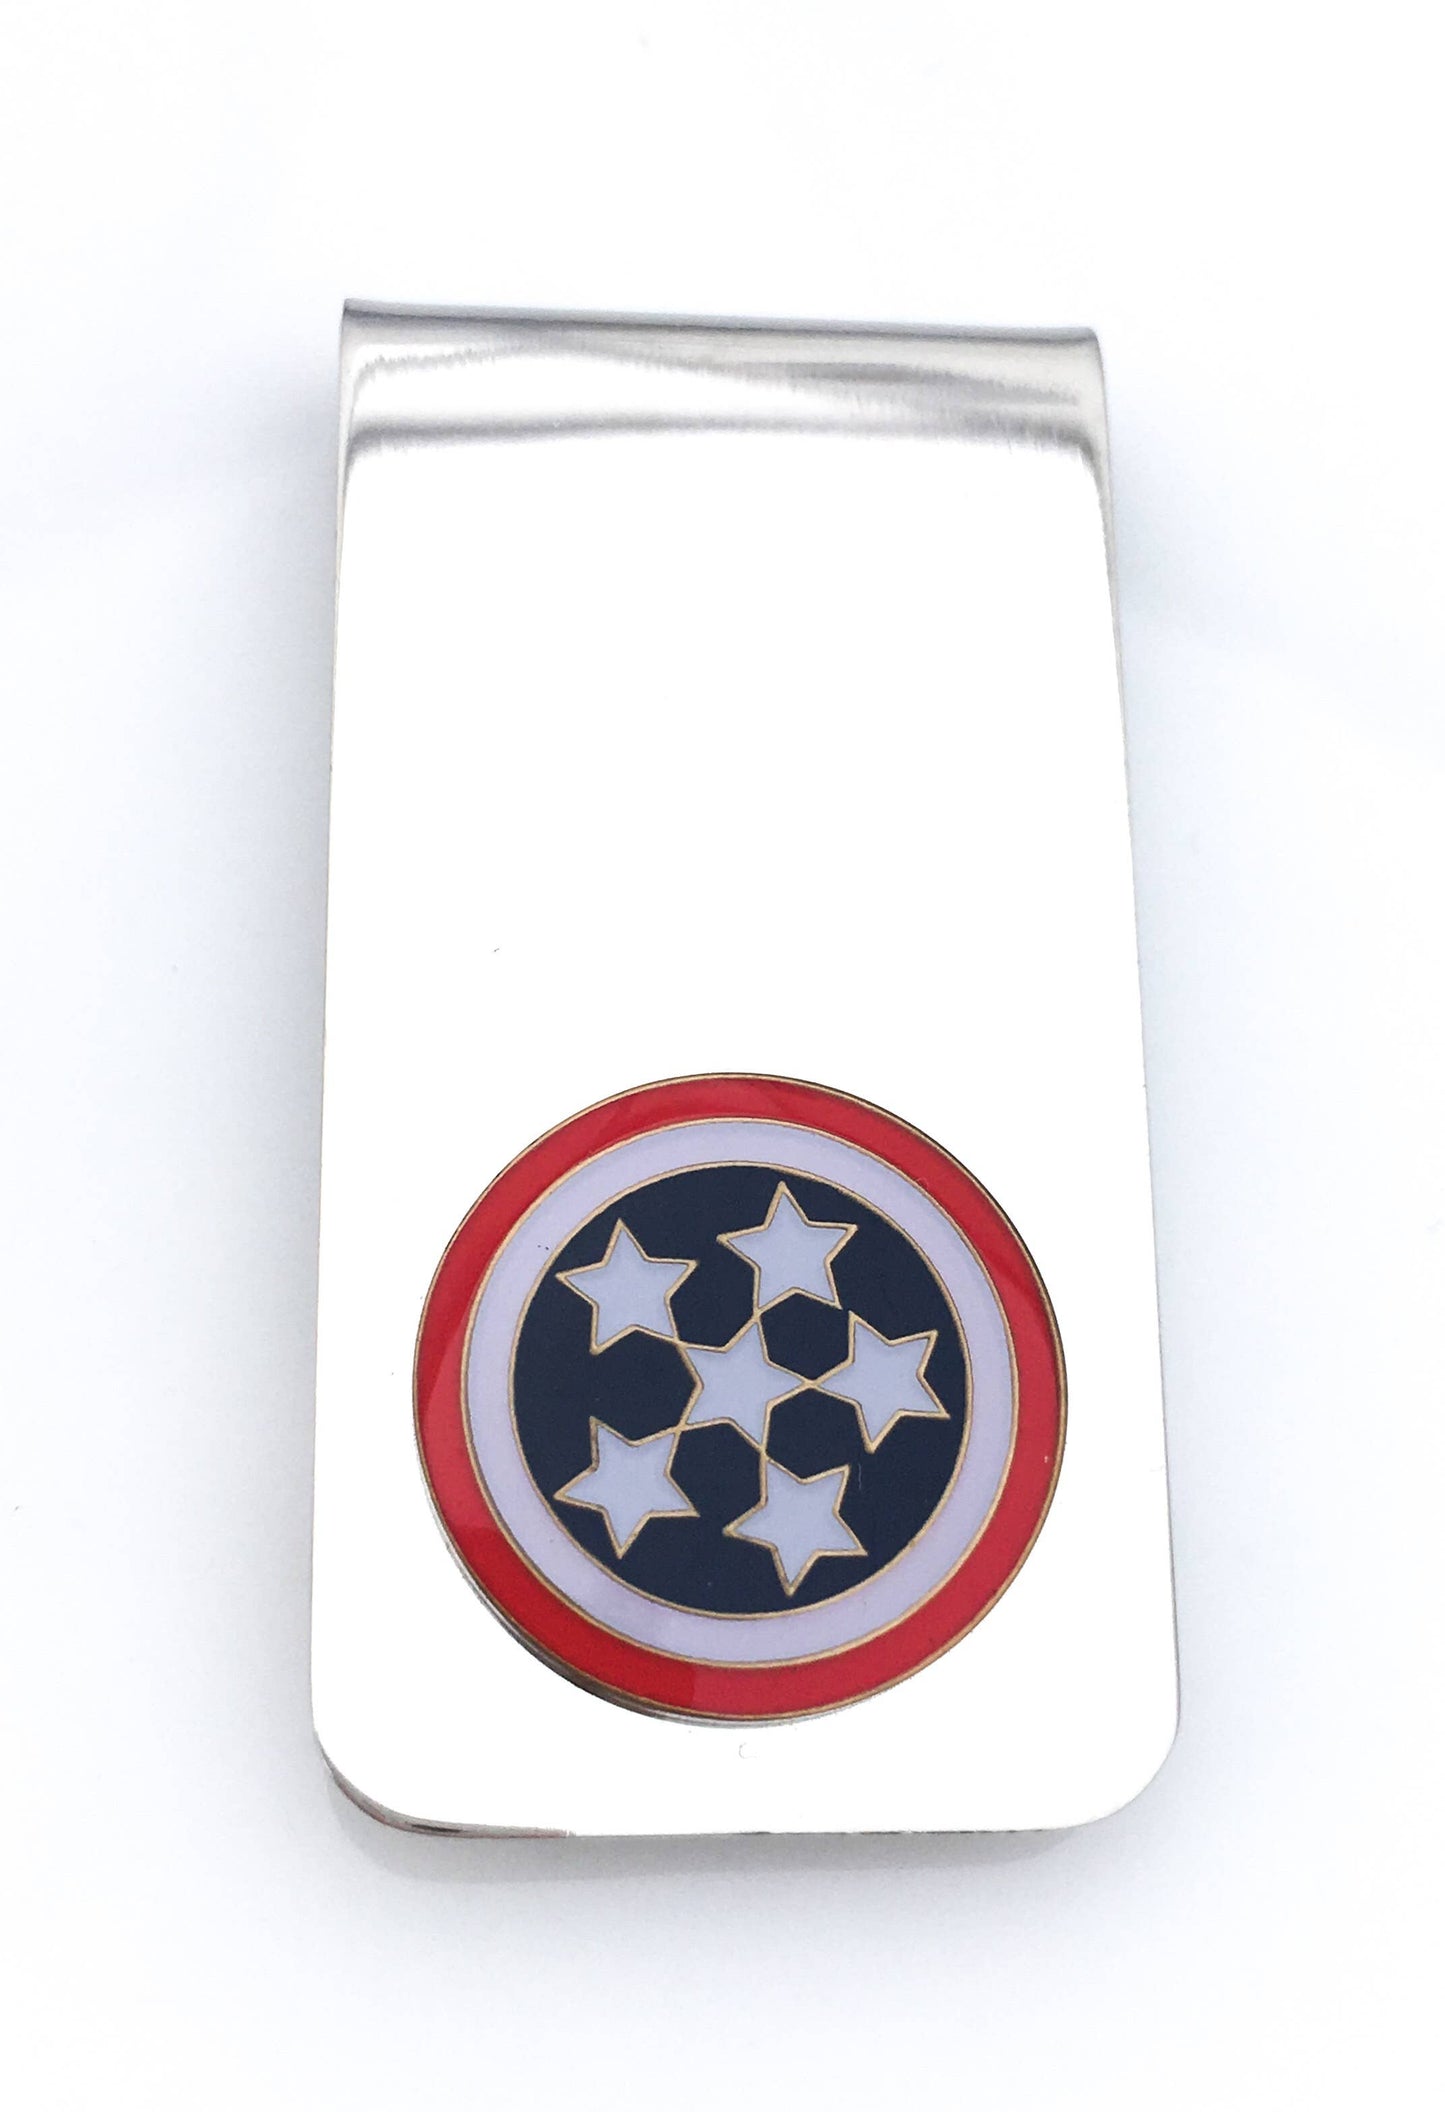 Red white and blue stars and stripes round money clip